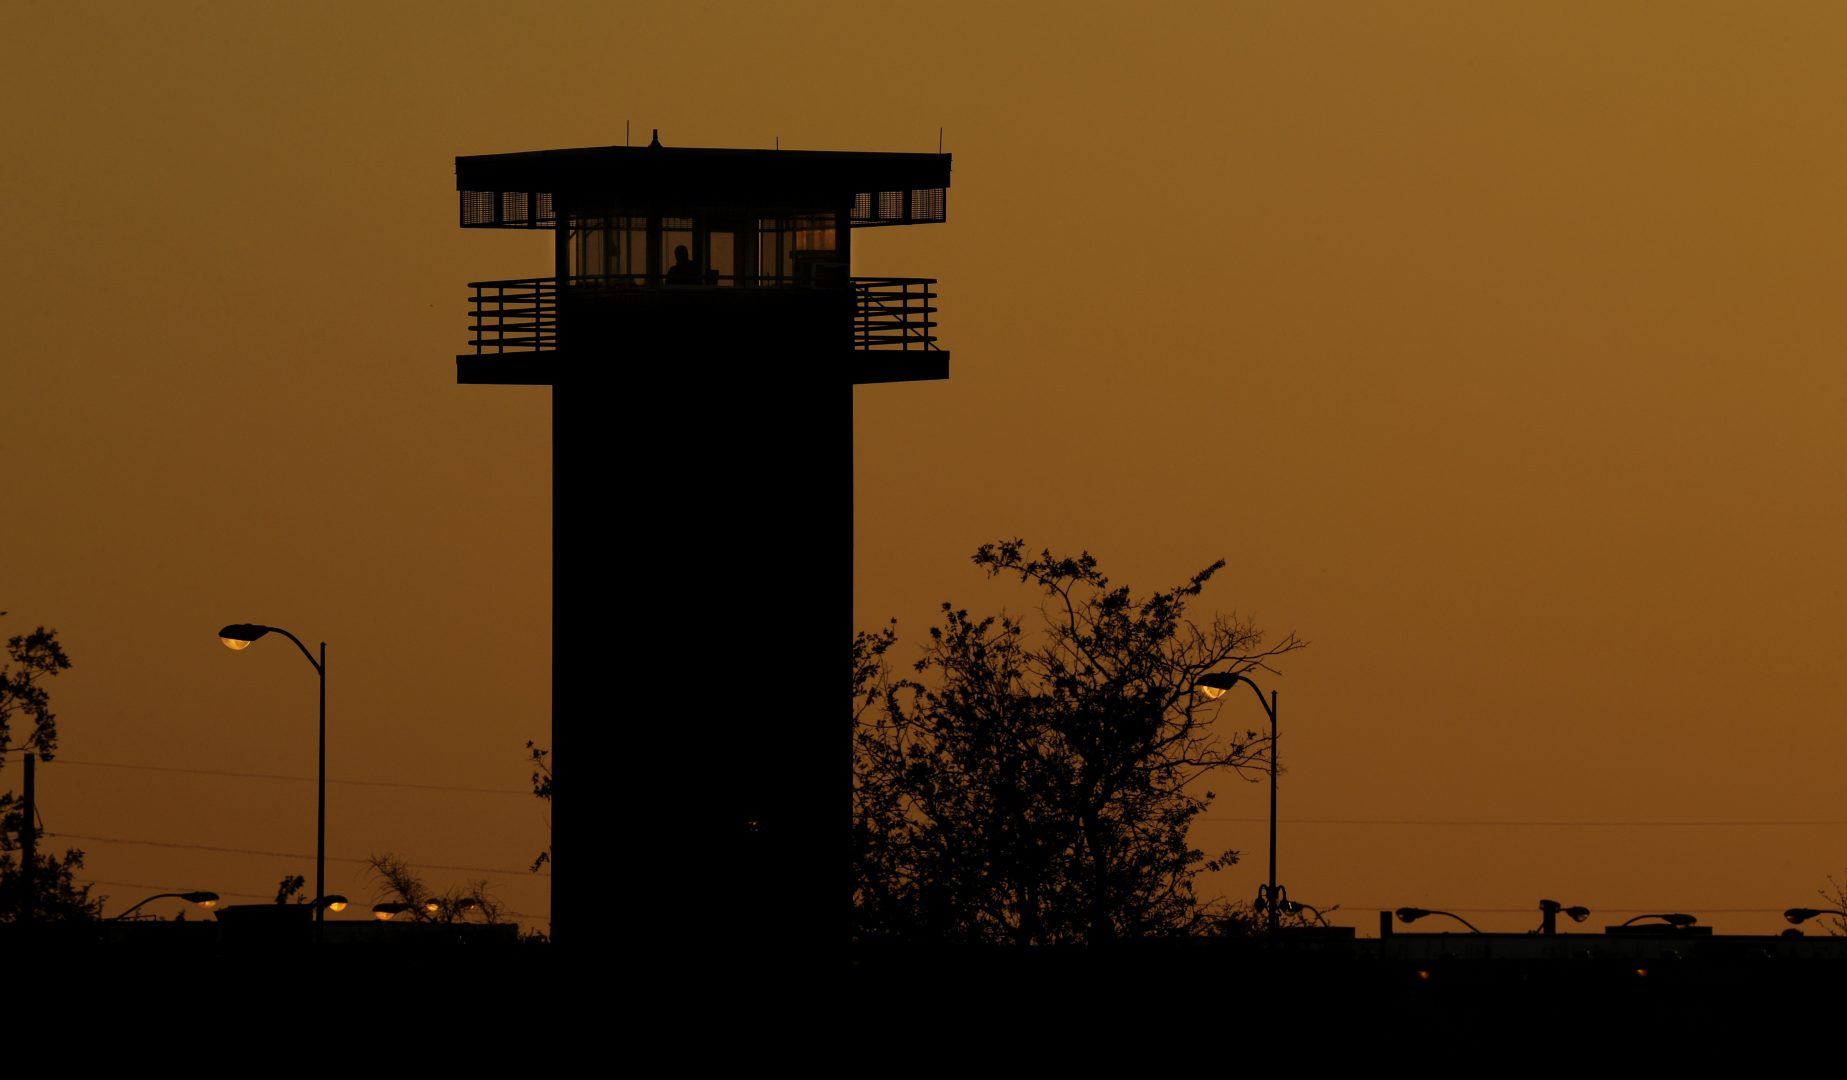 Part of the Texas Department of Criminal Justice's William G. McConnell Unit in Beeville, Texas, stands at sunset Wednesday, April 15, 2020. More than 26,000 people have been locked down in 22 Texas prisons that are keeping prisoners in their cells in an effort to contain the coronavirus, according to the TDCJ's most recent numbers. The McConnell Unit is not one of the 22. 